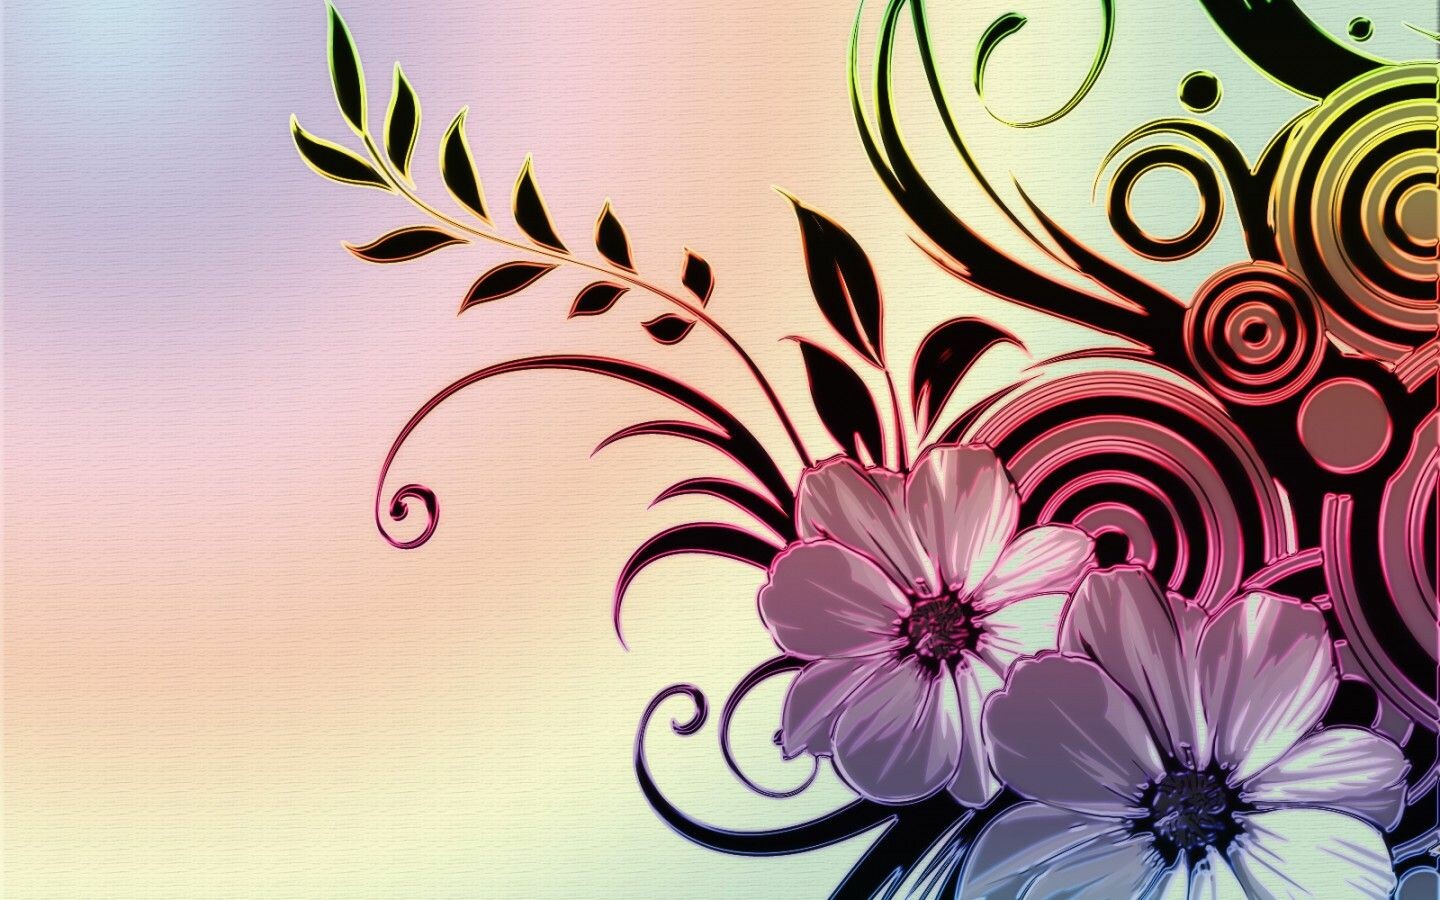  abstract flower wallpaper hd download  android  iphone hd wallpaper  background download HD Photos  Wallpapers 0 Images  Page 1